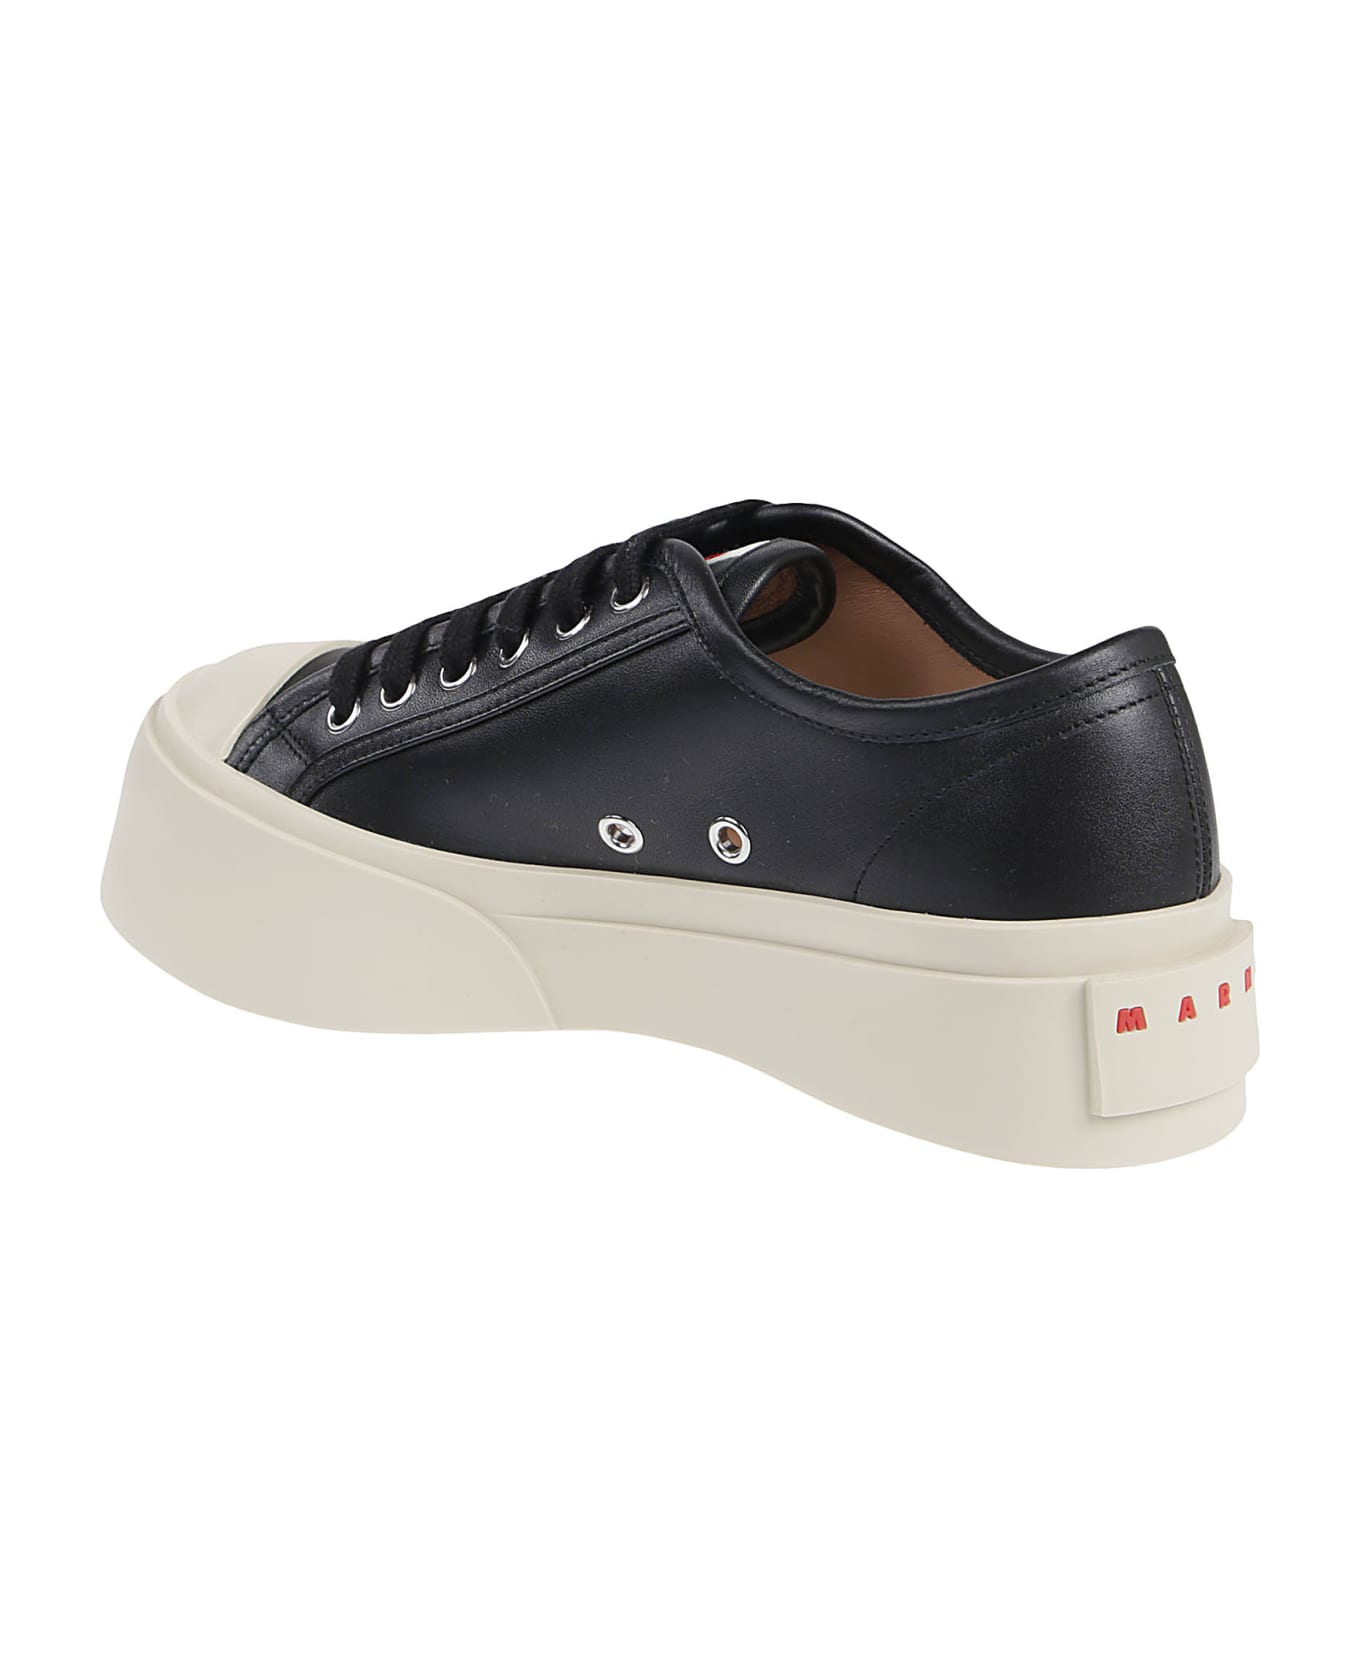 Marni Pablo Lace Up Sneakers - Black